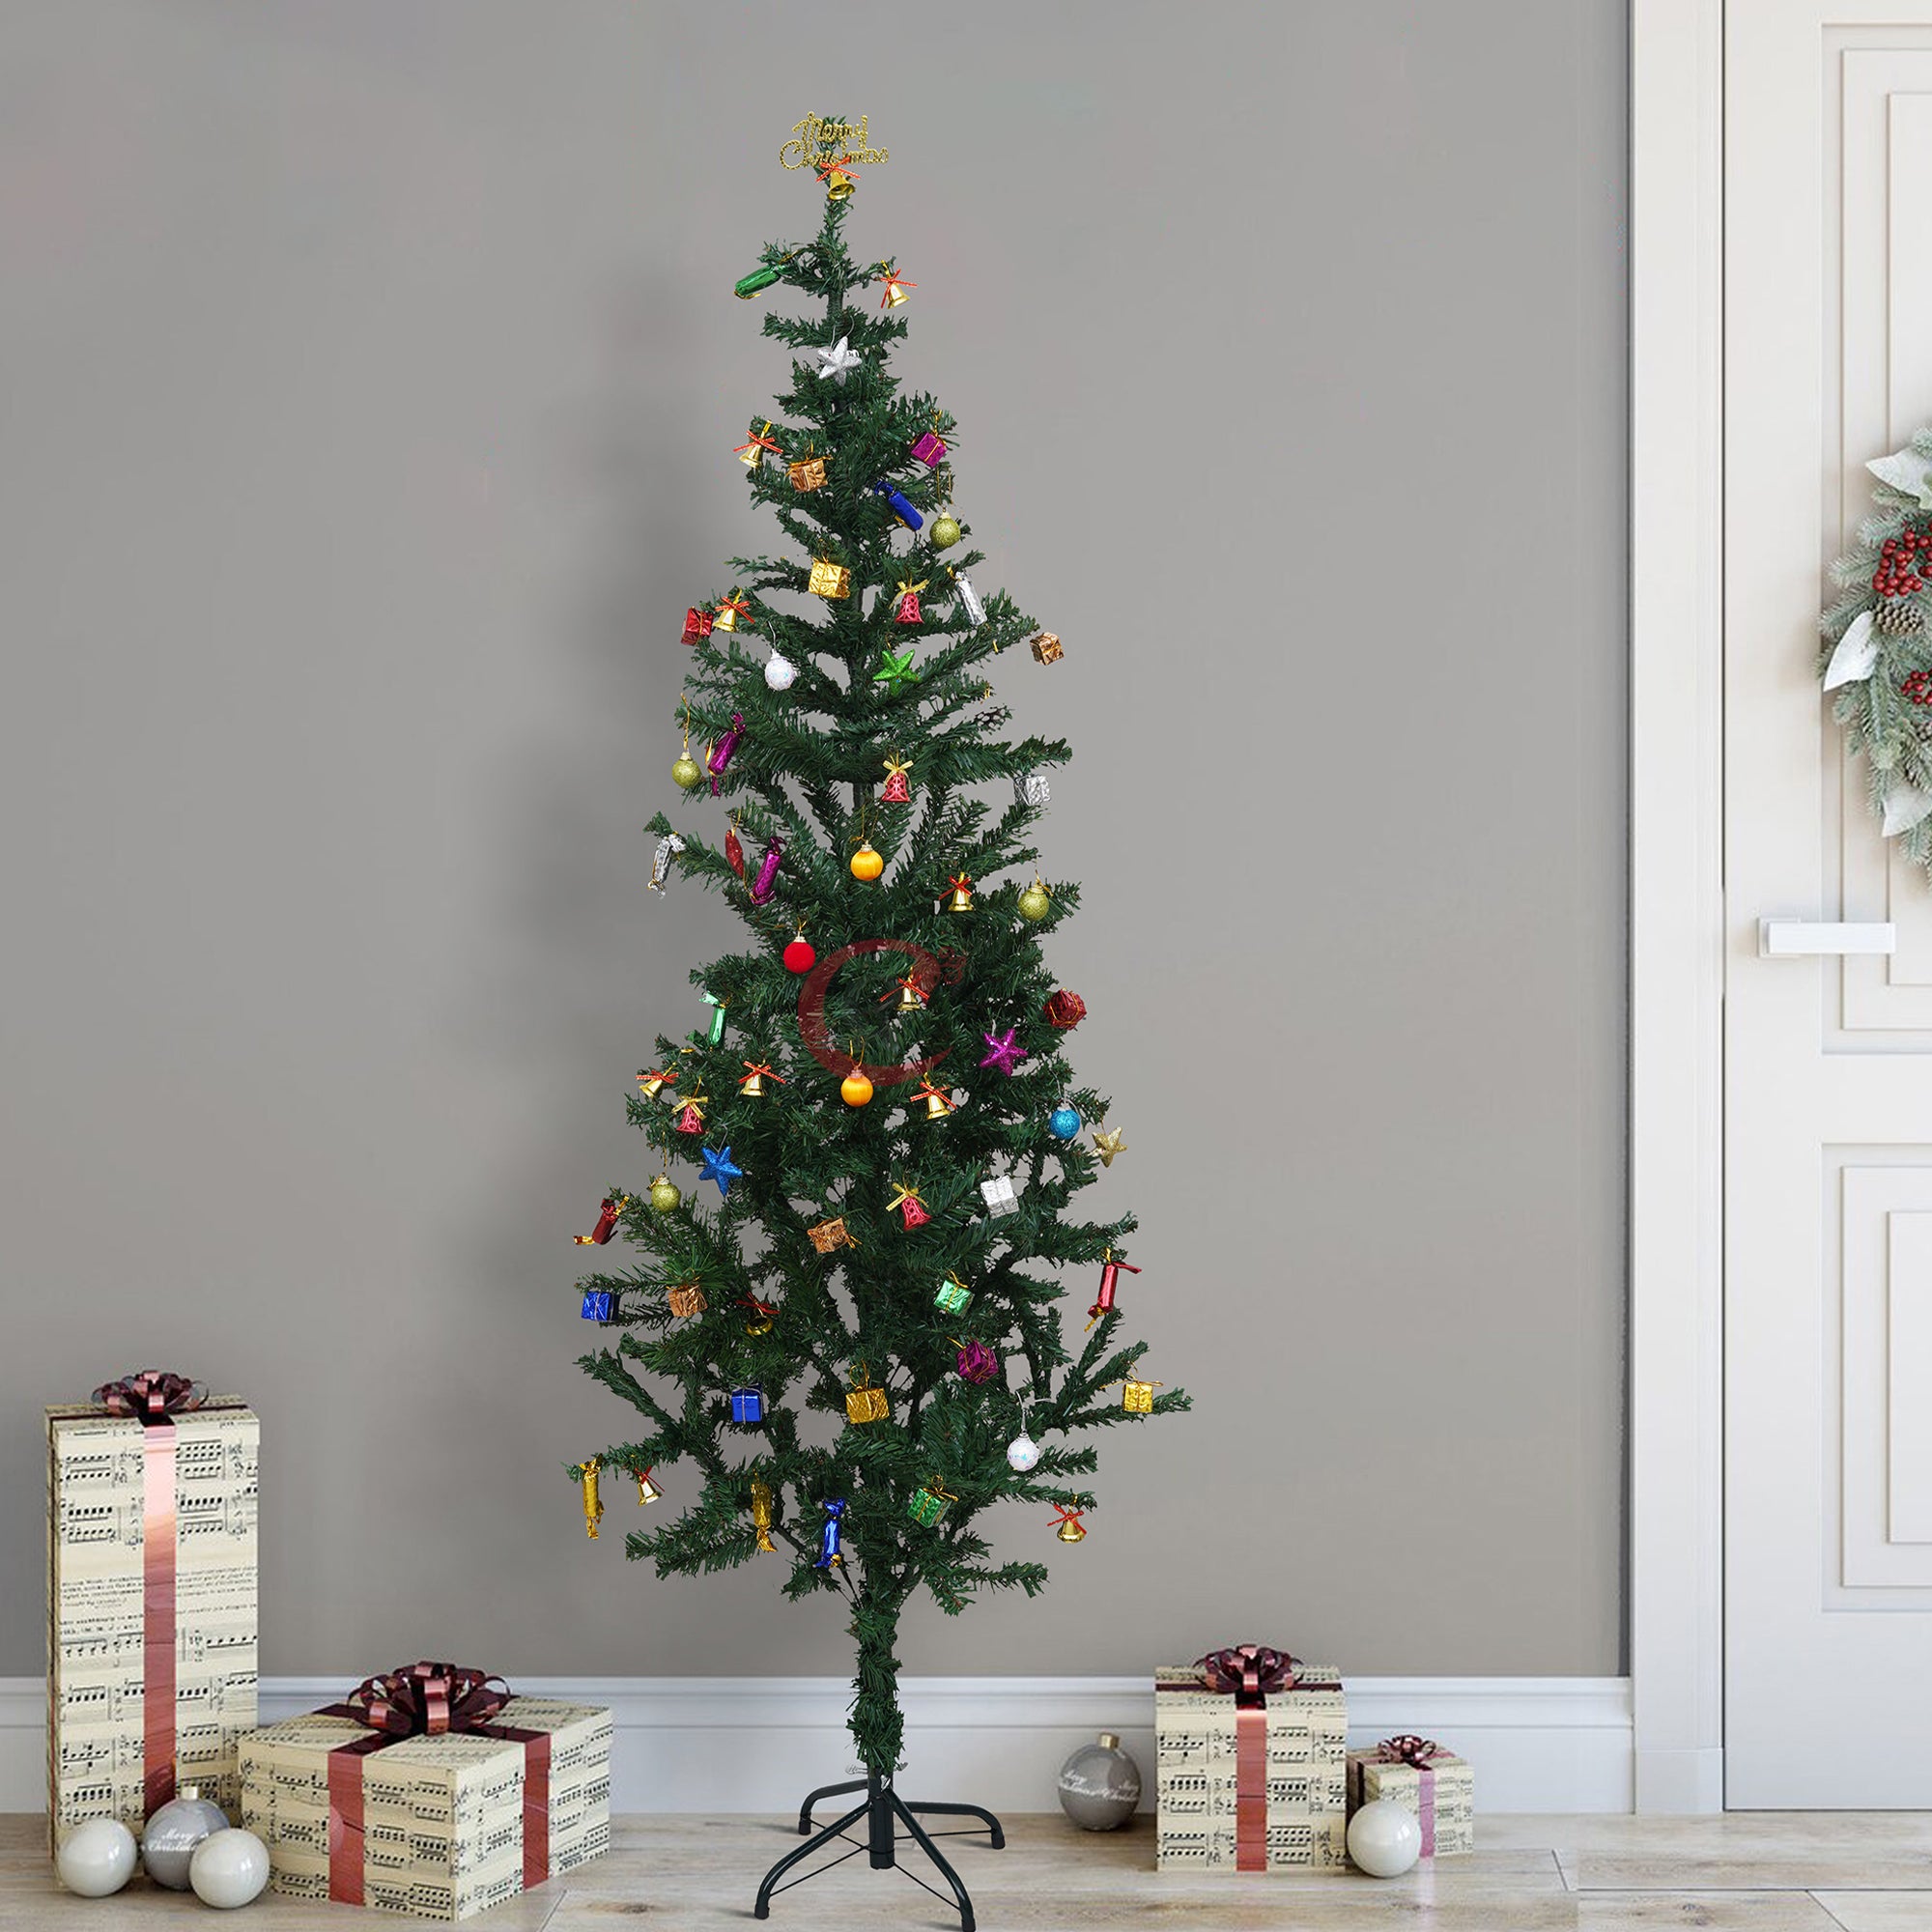 eCraftIndia 6 Feet Green Artificial Christmas Tree Xmas Pine Tree with Metal Stand - Xmas Tree for Indoor, Outdoor, Home, Living Room, Office, Church Decor - Merry Christmas Decoration Item 4